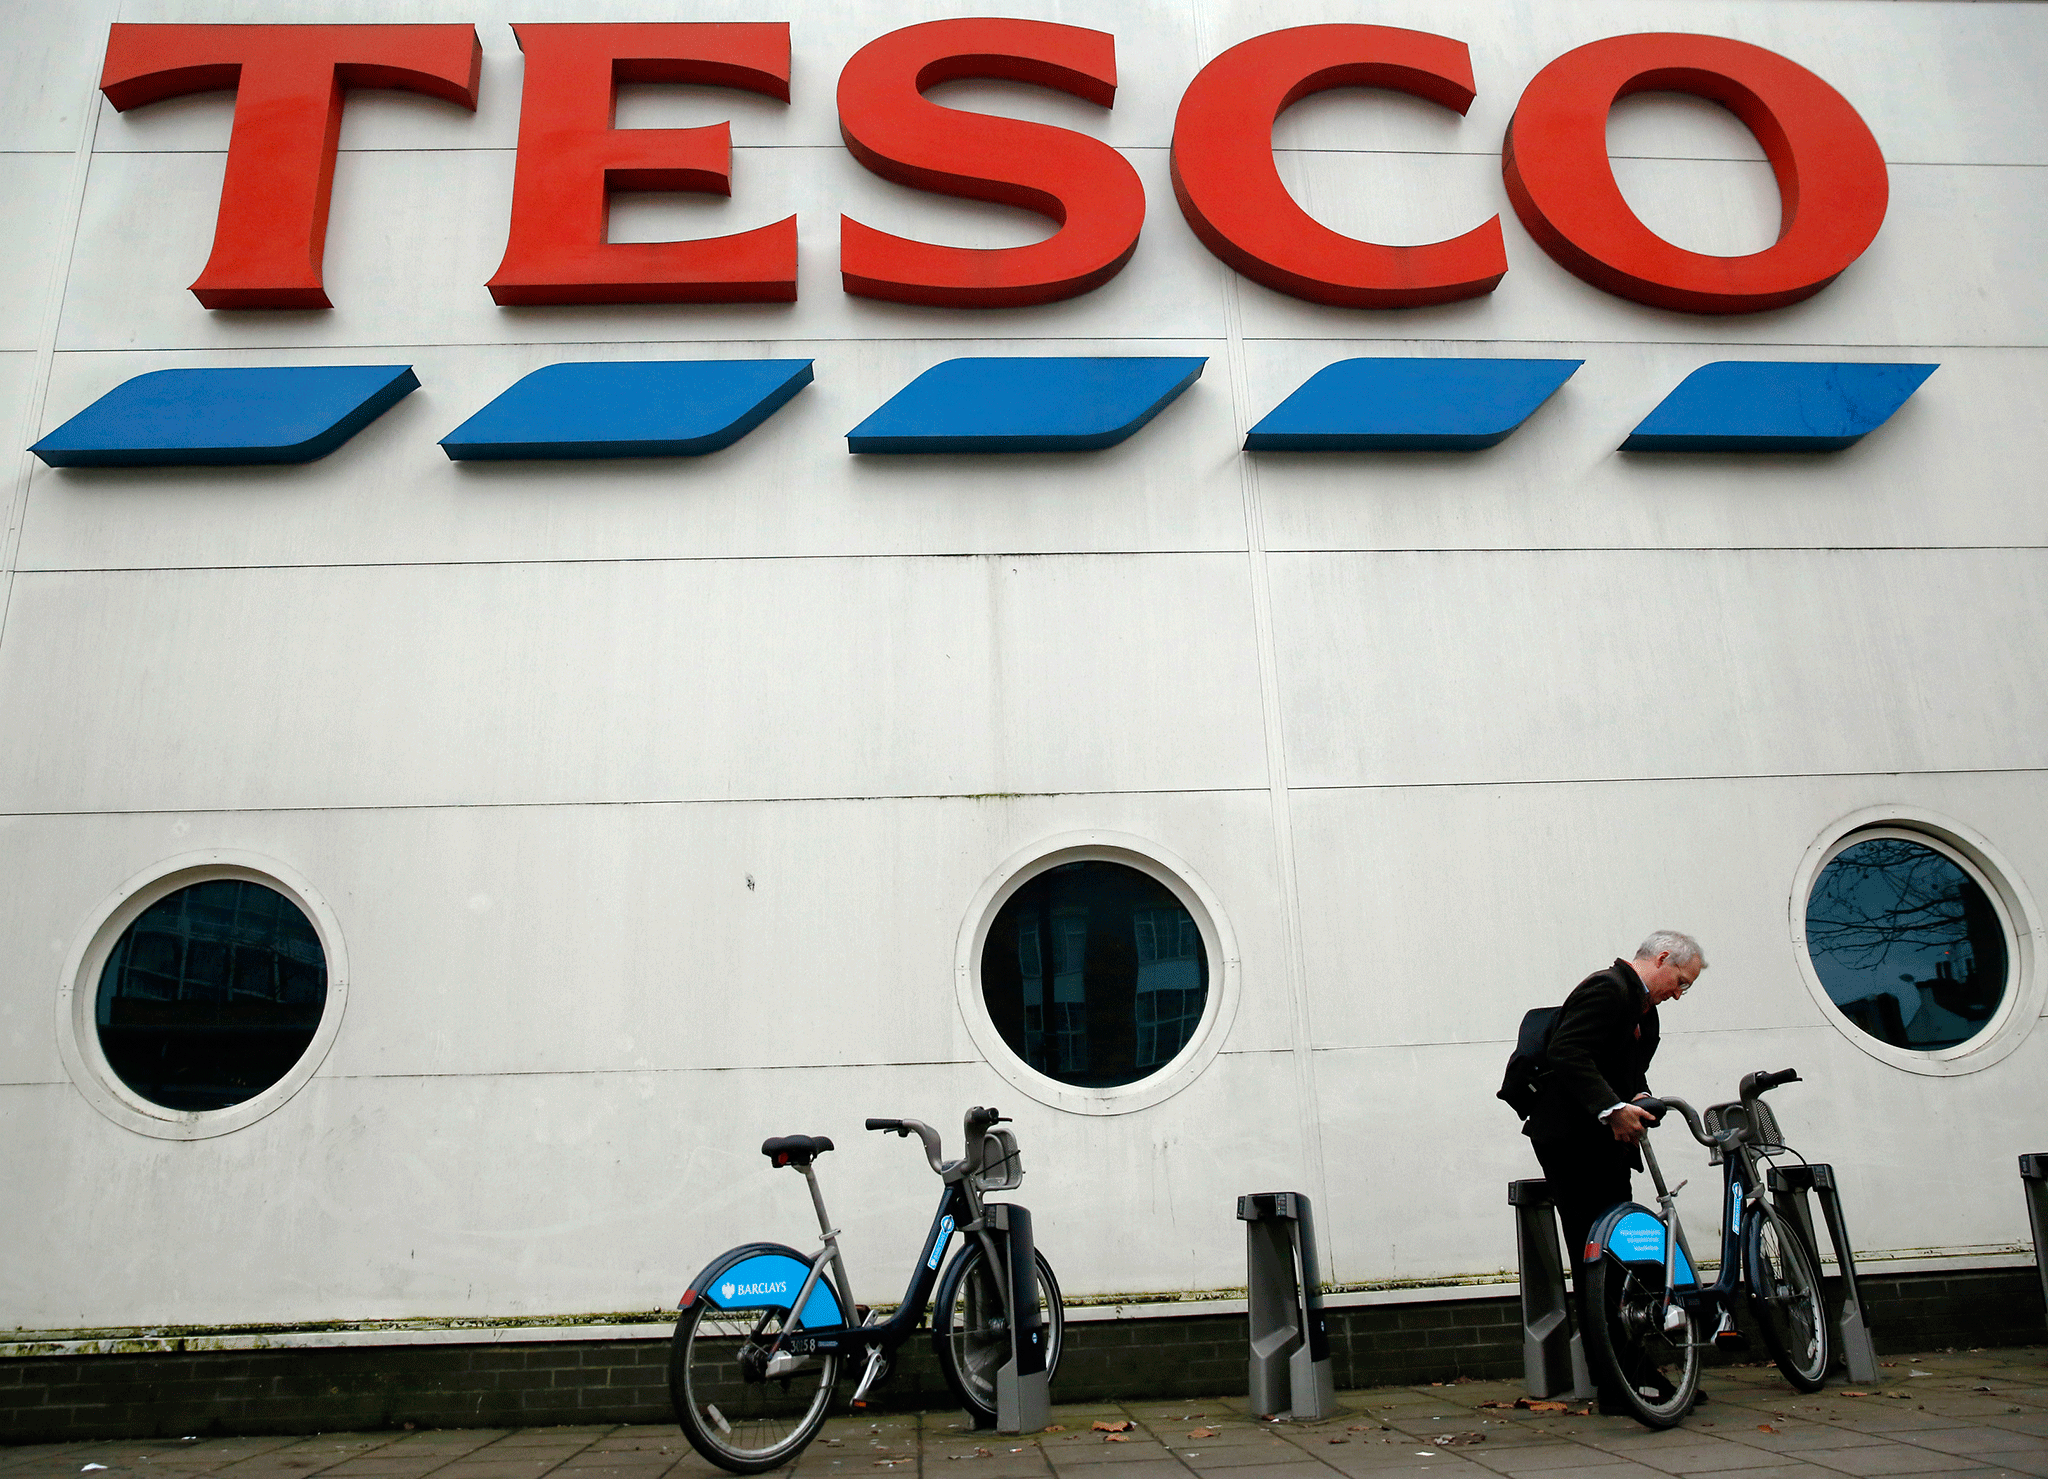 Tesco shares lost almost half of their value in the months after the scandal broke and have struggled to recover properly since